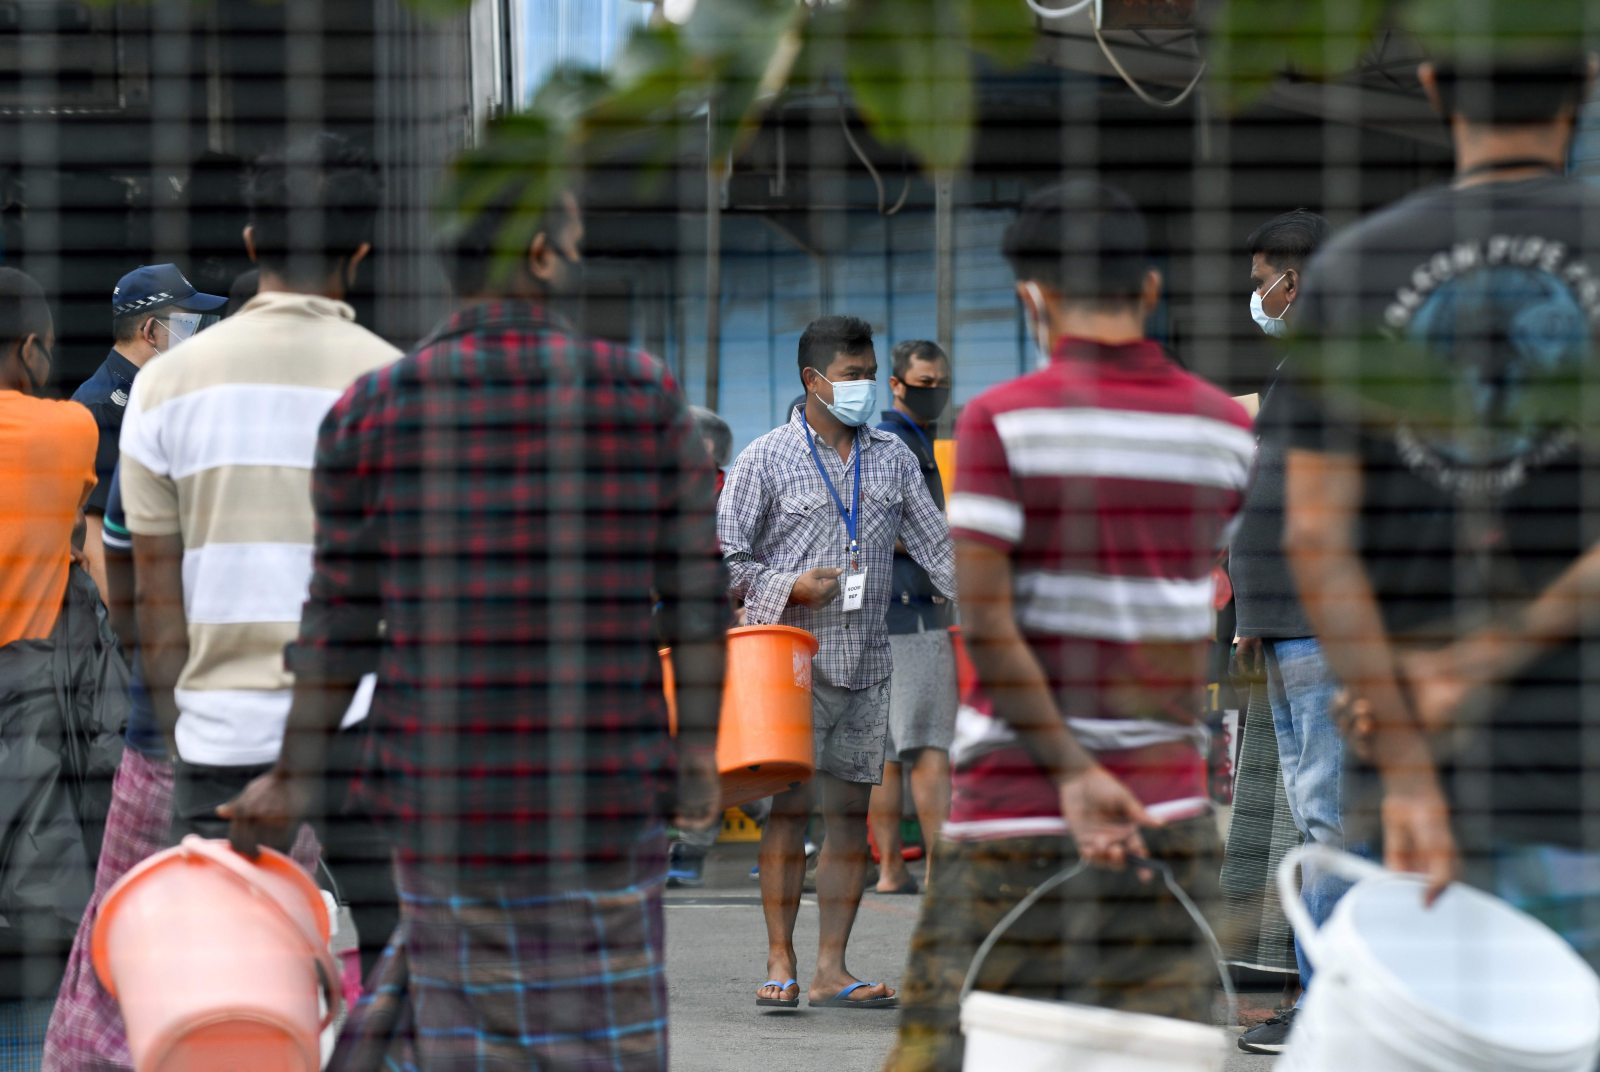 Singapore experienced an outbreak among migrant workers living in dormitories. (Photo / Retrieved from Getty Images)